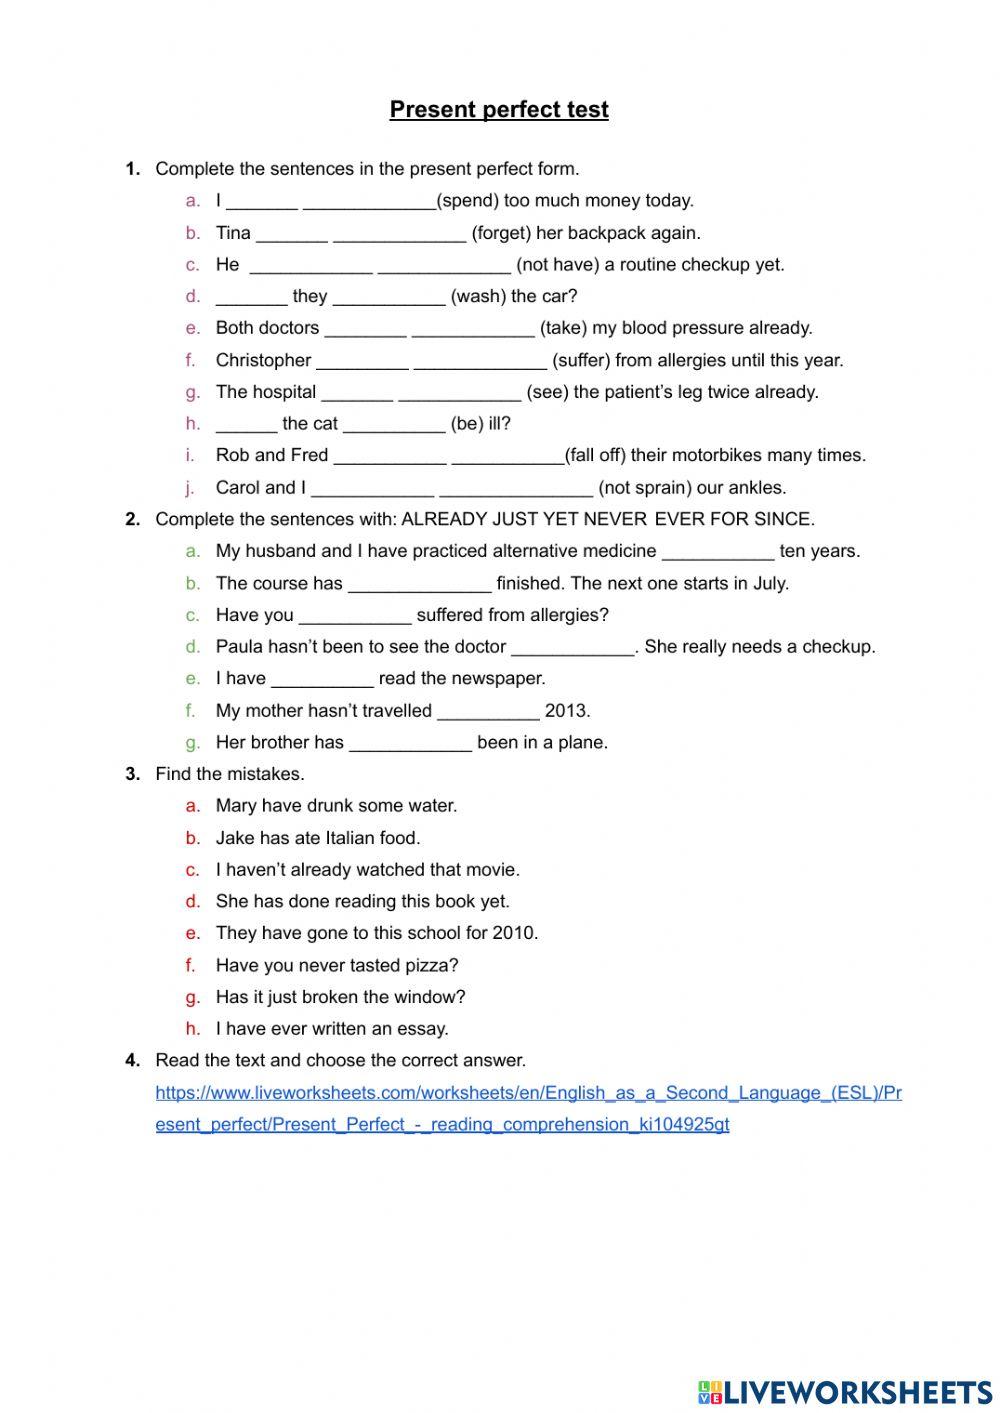 Present perfect test online activity | Live Worksheets